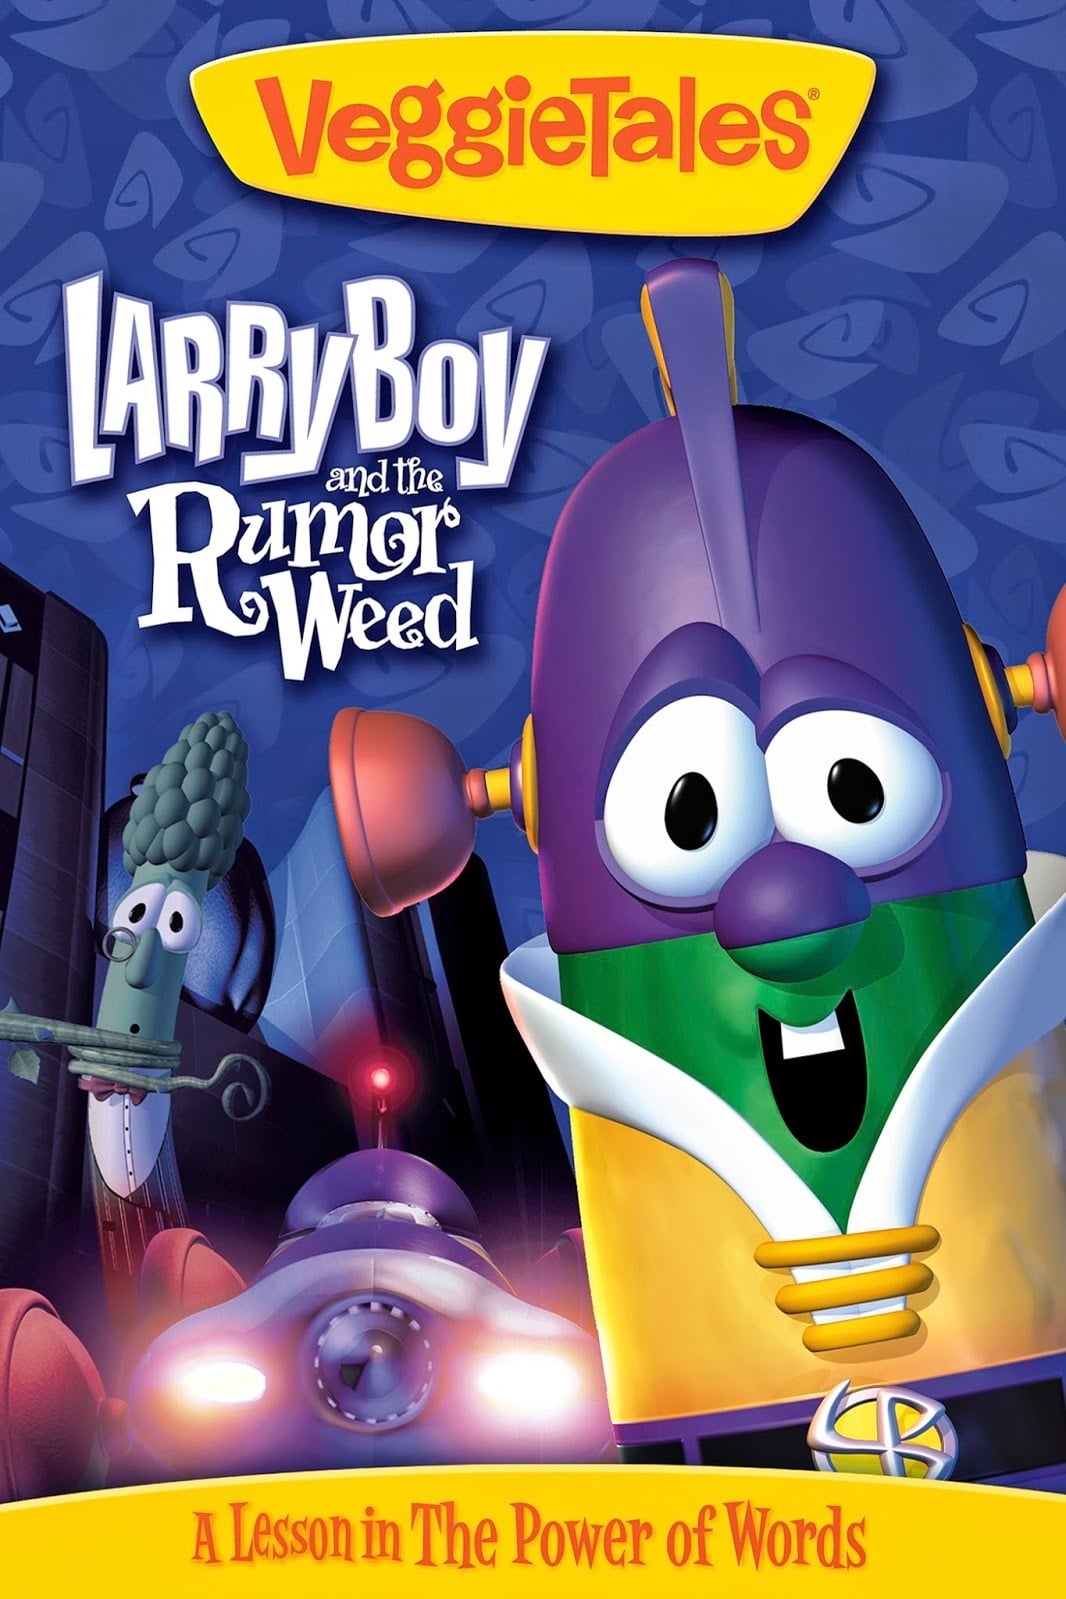 LarryBoy and the Rumor Weed